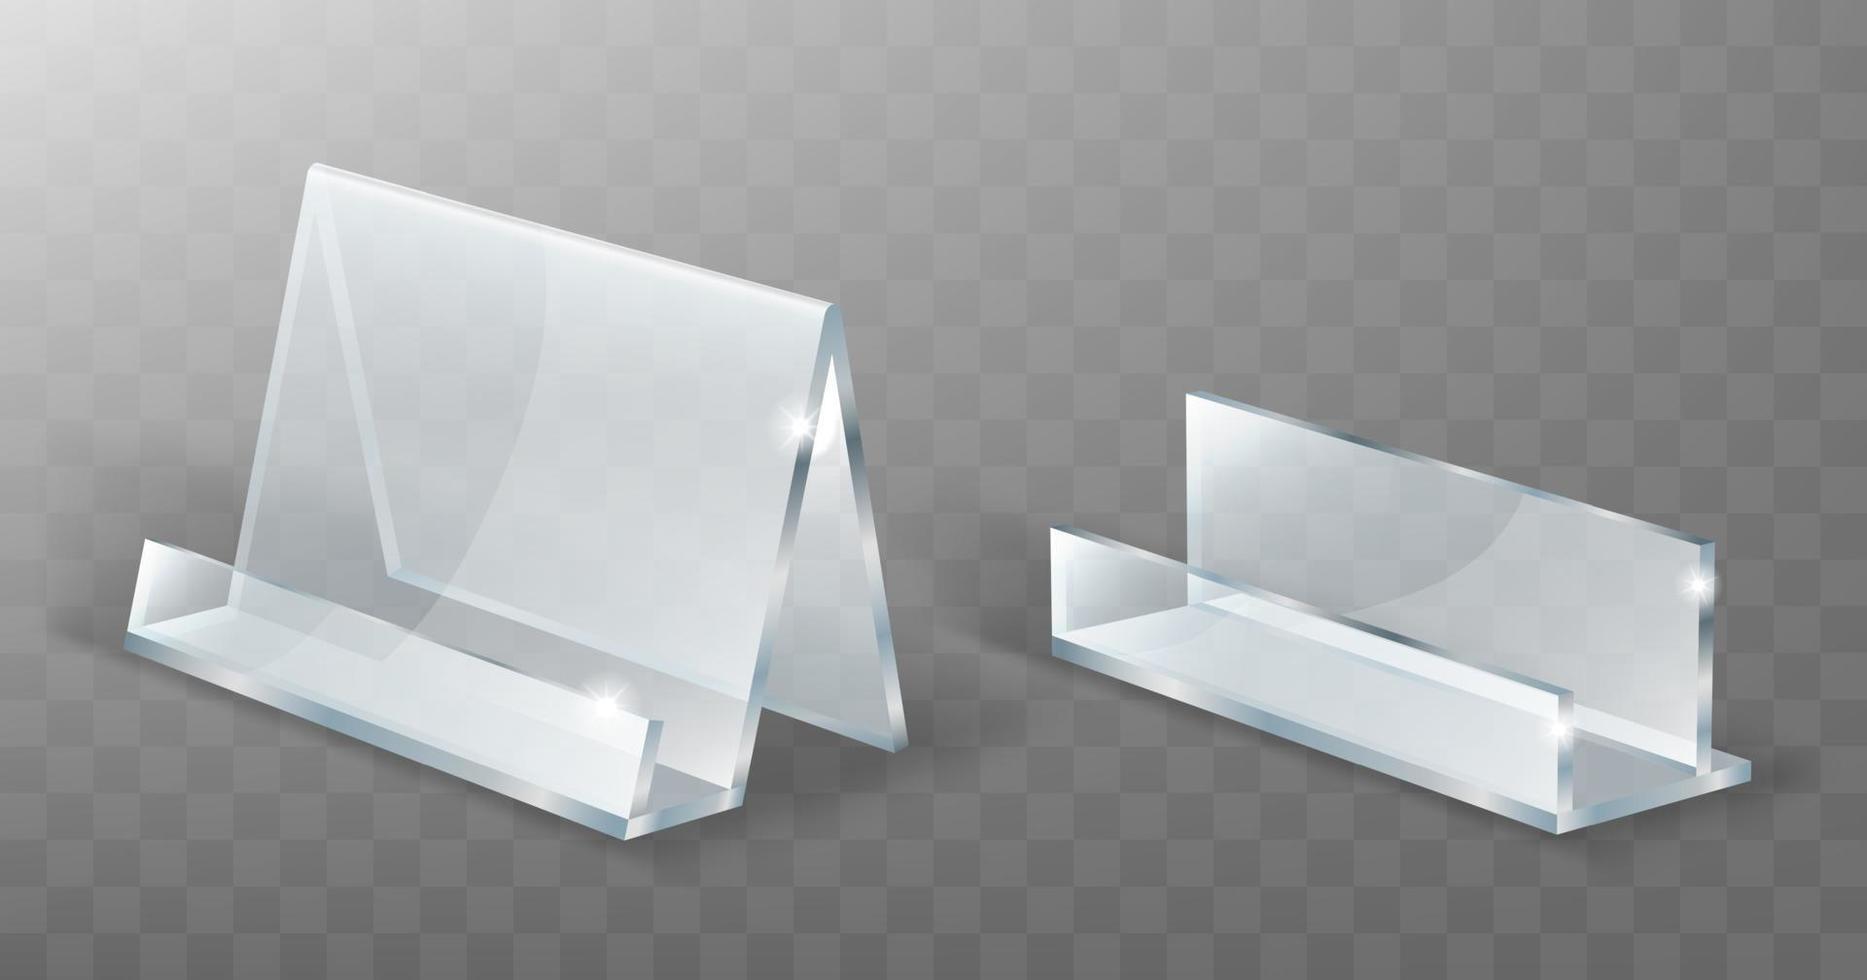 Acrylic holder, glass or plastic display stand vector